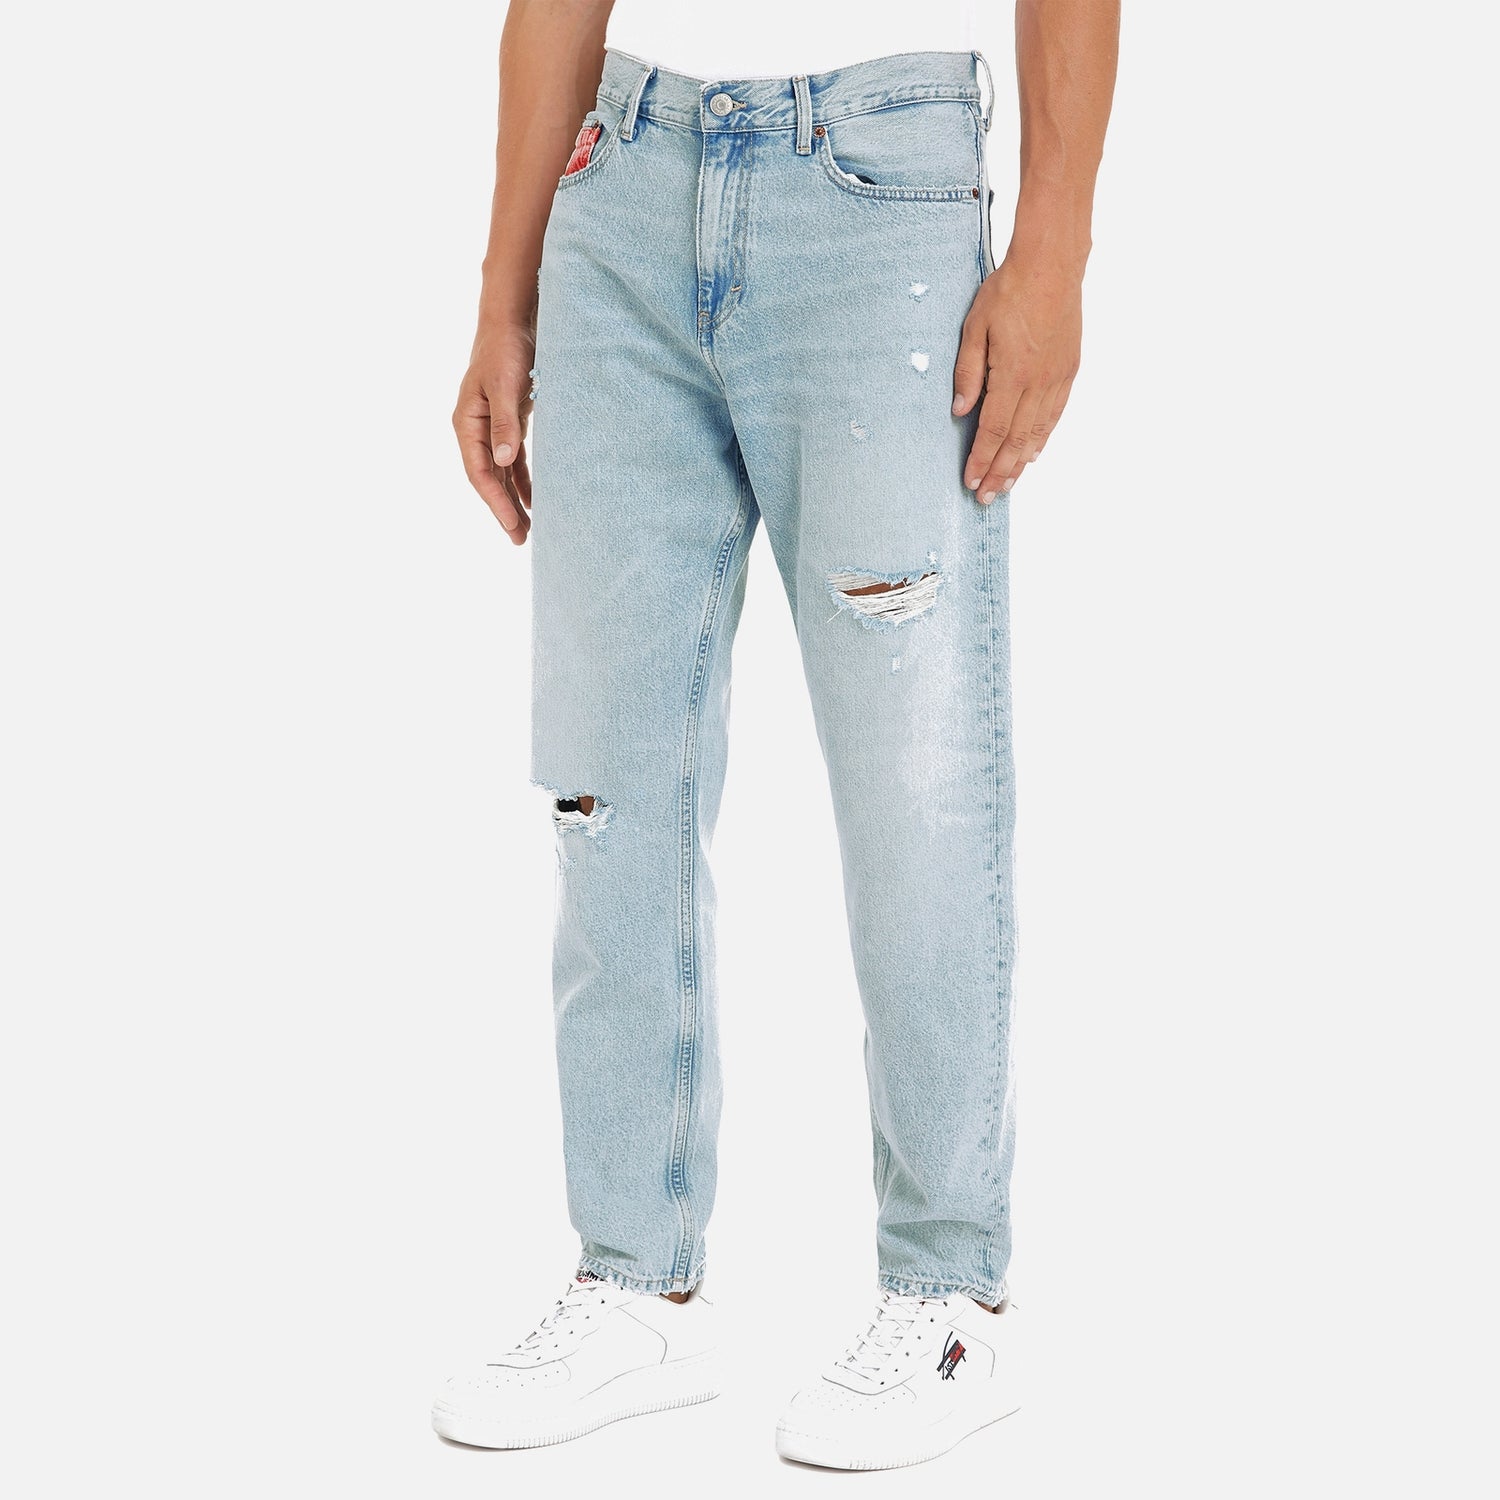 Tommy Jeans Isaac Archive Denim Jeans - W30/L32